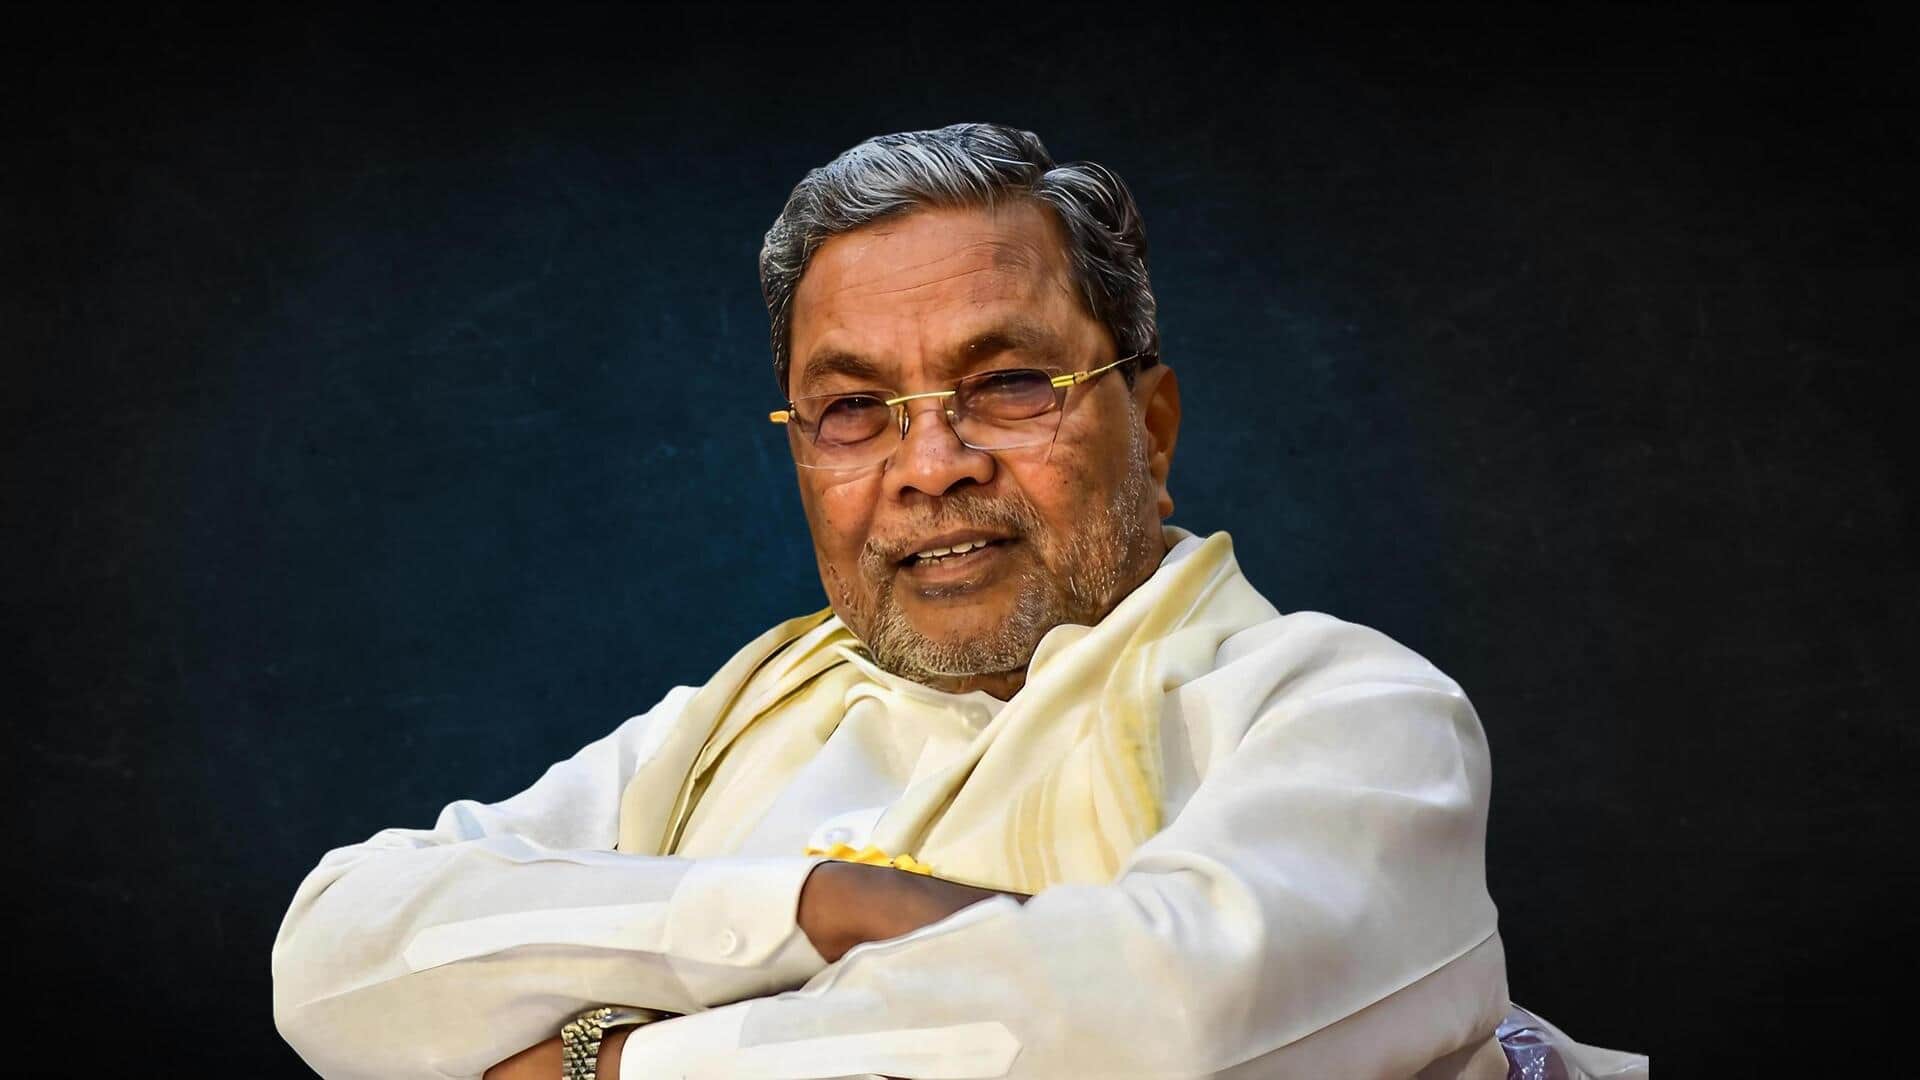 After Udhayanidhi, Siddaramaiah's comments on temple sparks row